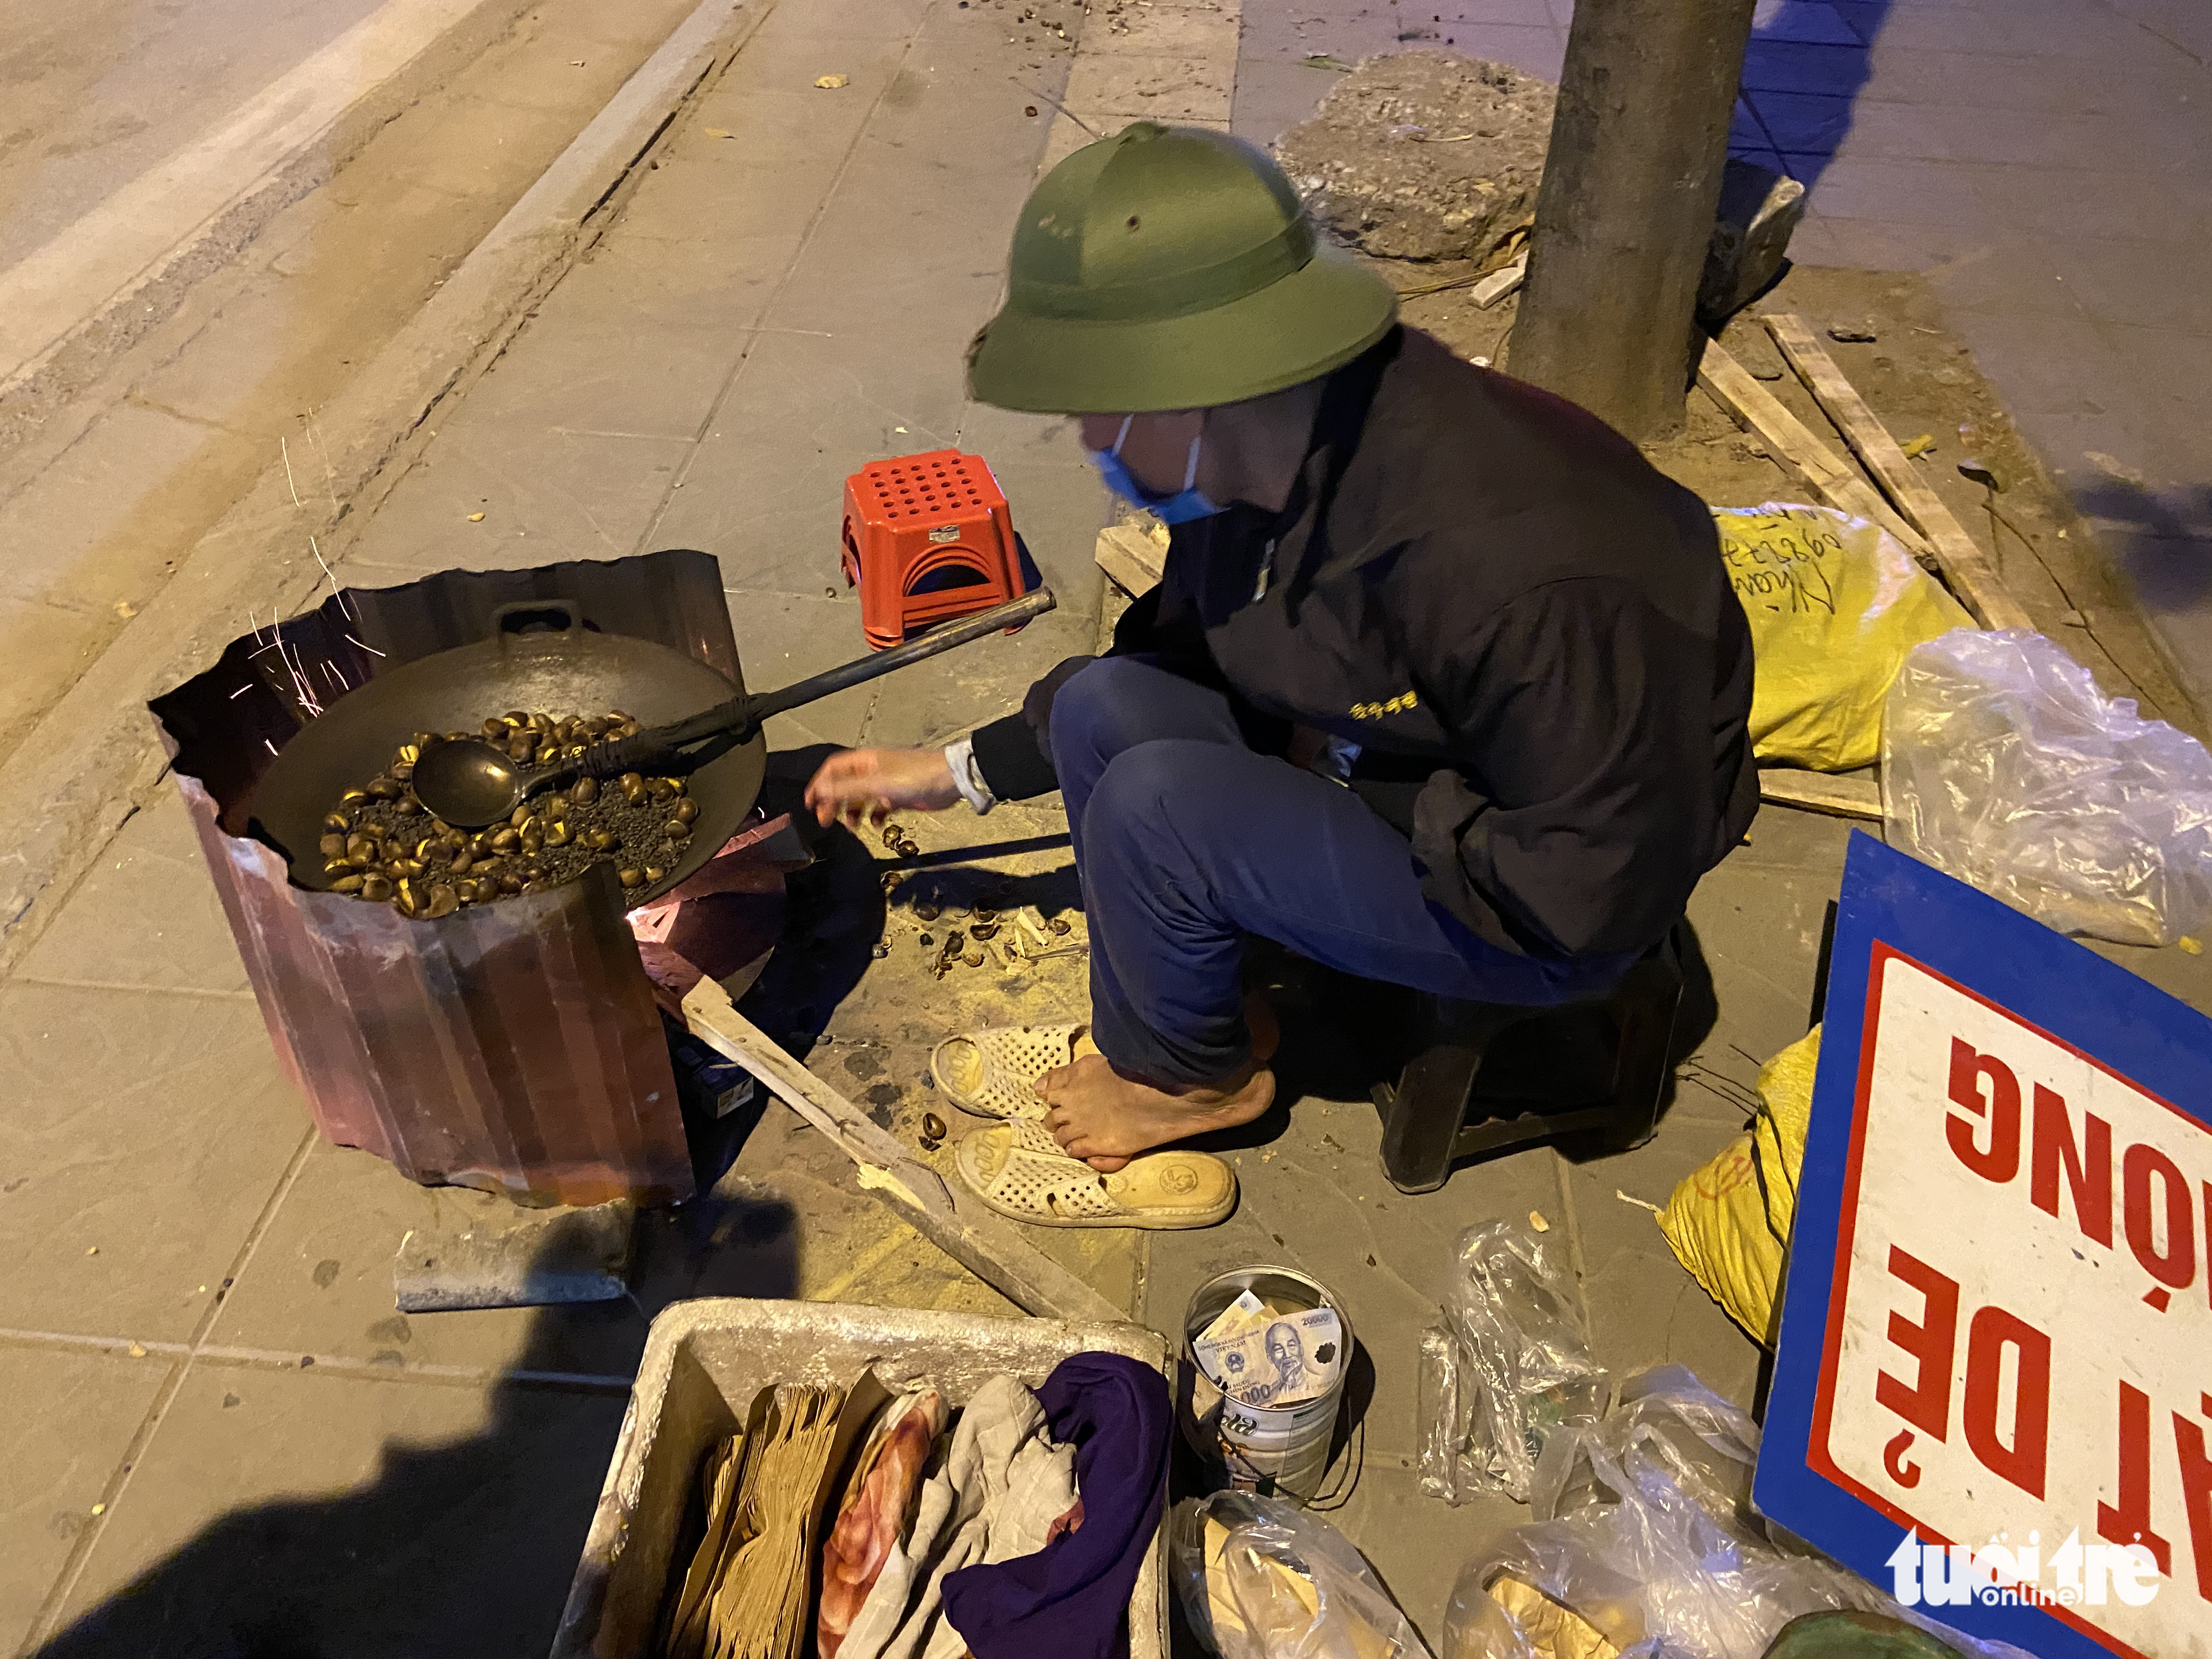 A man sells fried chestnuts on a sidewalk in Hanoi, December 27, 2021. Photo: Tuoi Tre